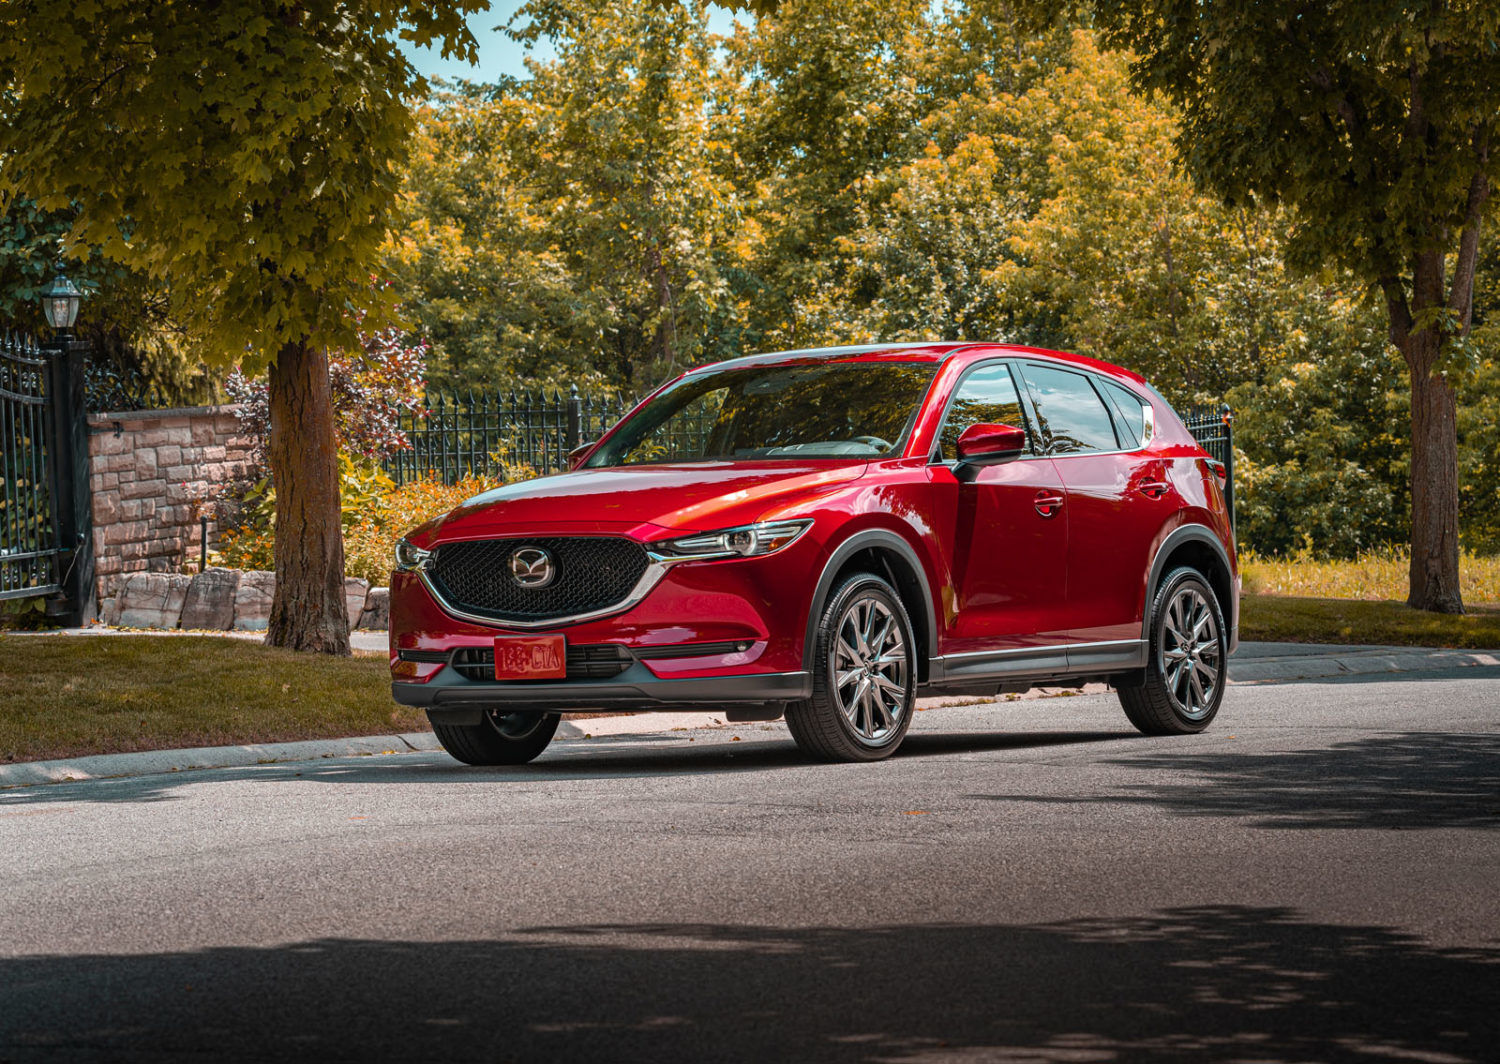 The Mazda CX-5 Signature Diesel arrives in August Starting at $ 45,000